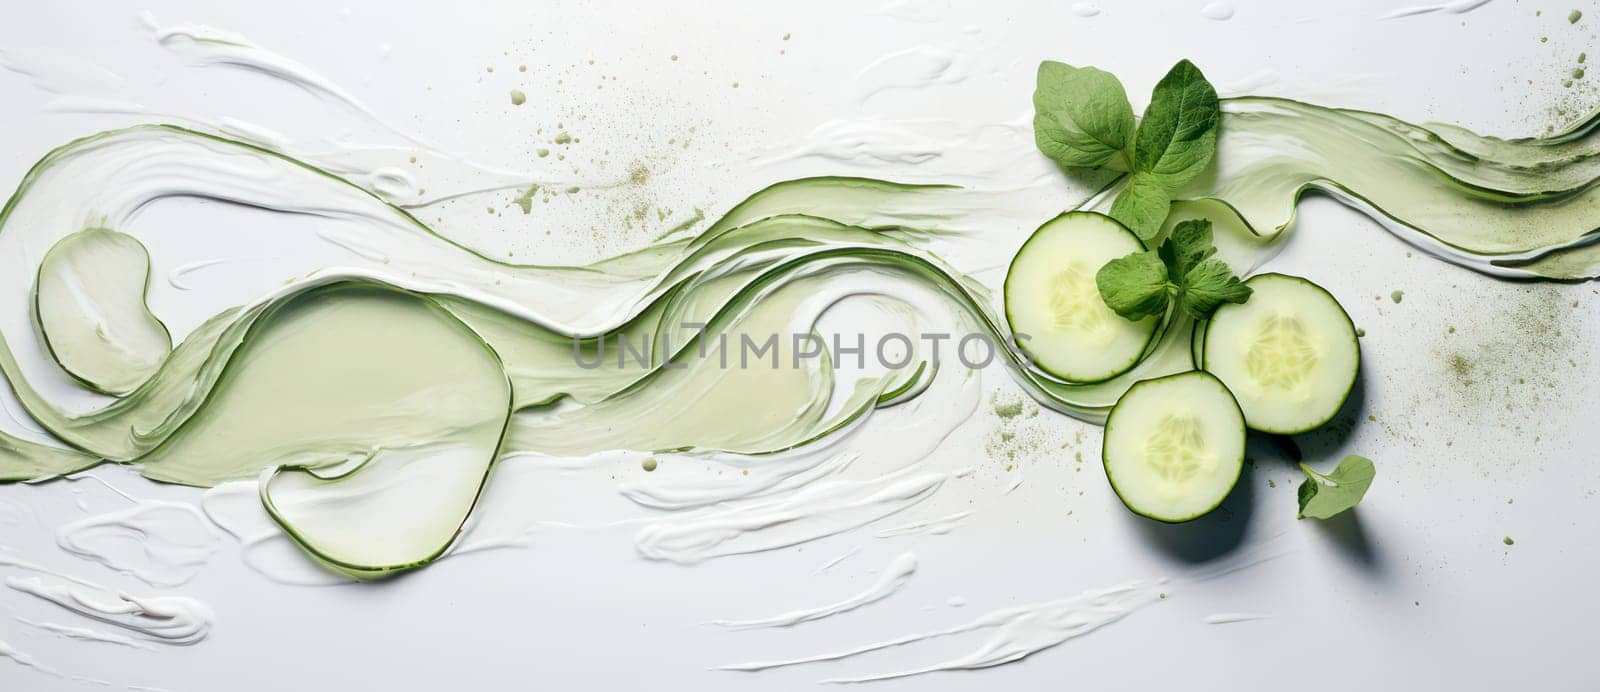 Fresh Cucumber: A Natural and Healthy Spa Treatment for Green Beauty and Body Care on a Wooden Table